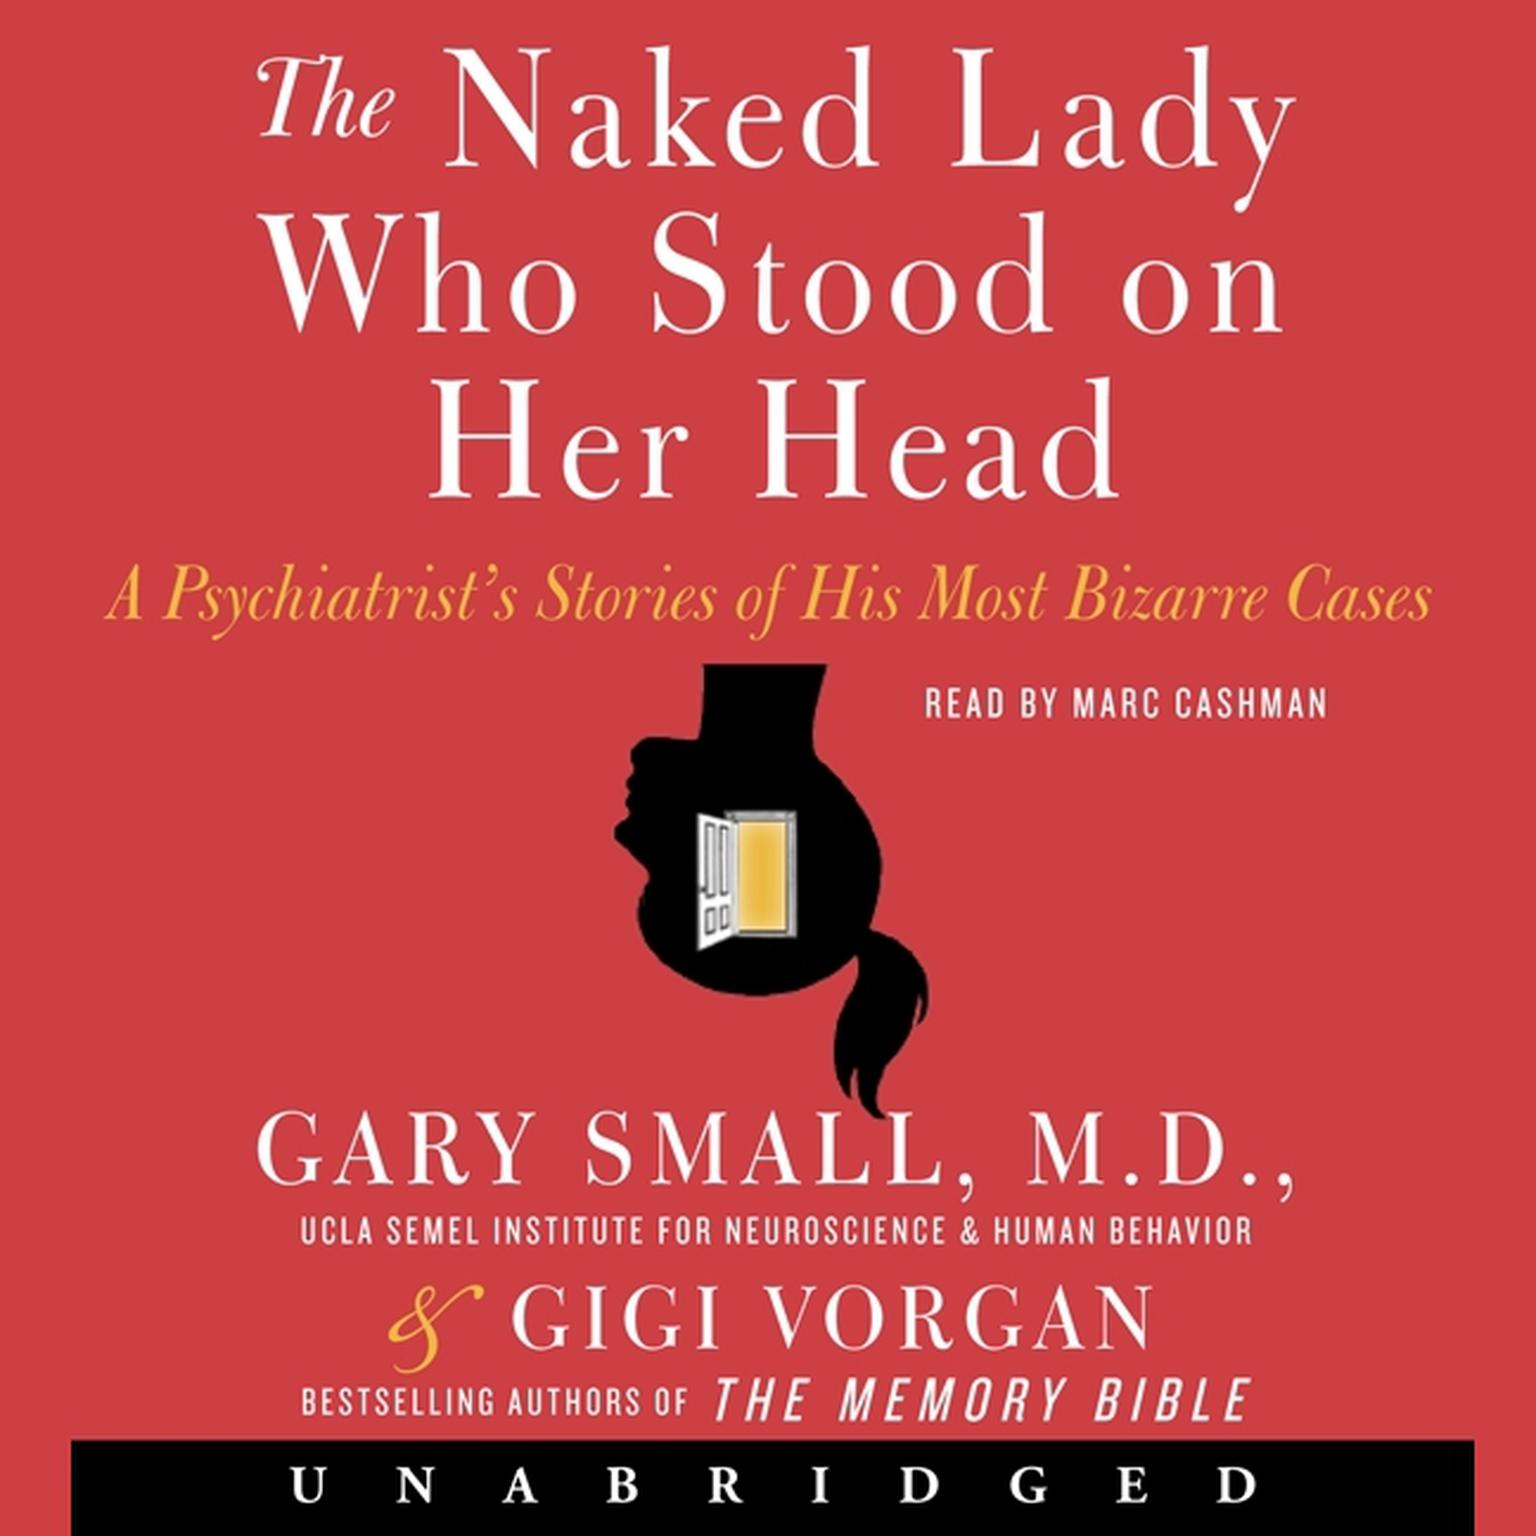 The Naked Lady Who Stood on Her Head: A Psychiatrist’s Stories of His Most Bizarre Cases Audiobook, by Gary Small